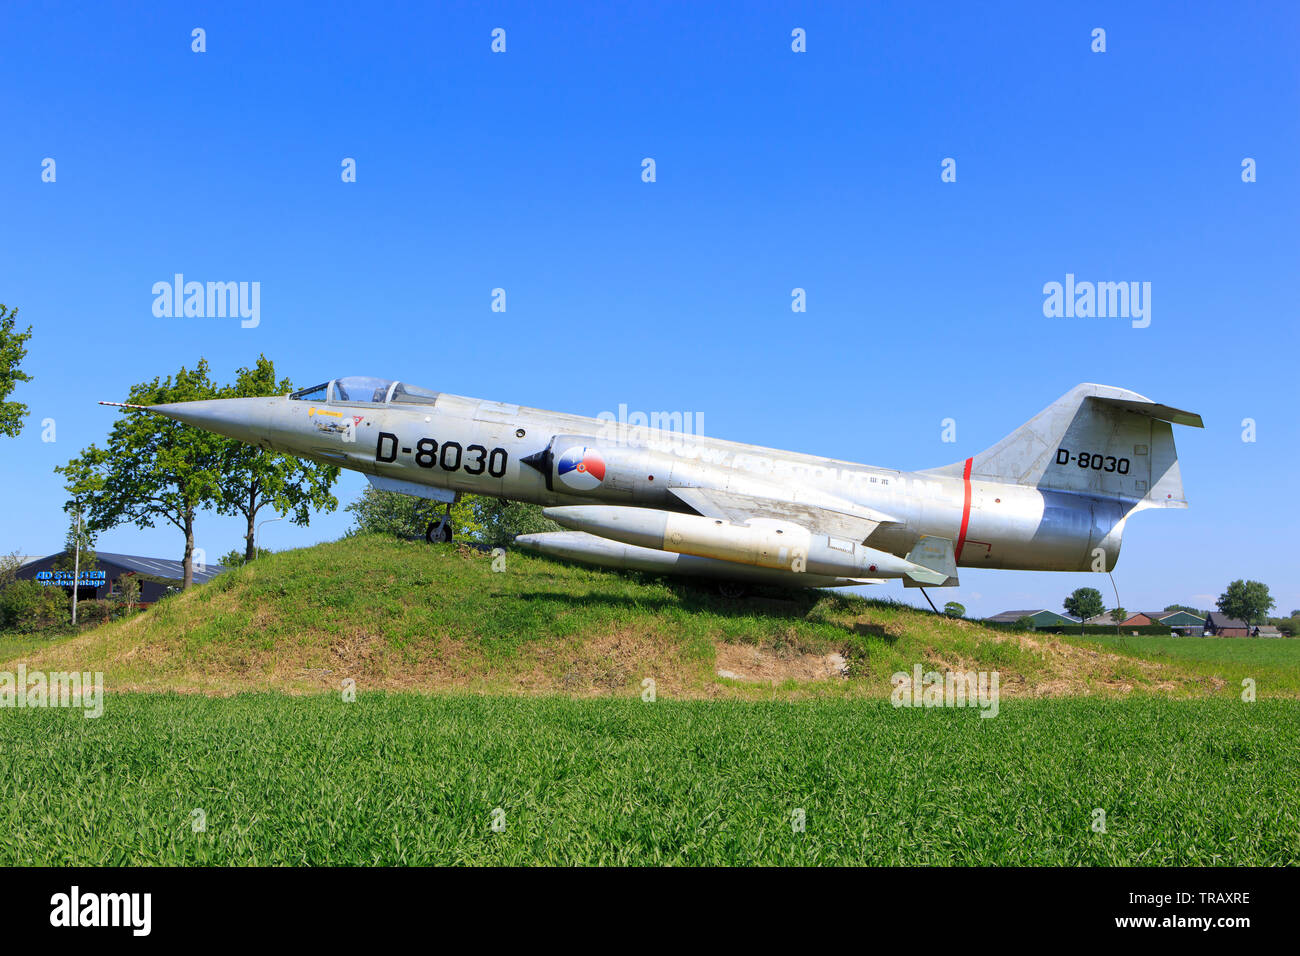 The D-8030 Royal Netherlands Air Force Lockheed F-104 Starfighter in Oosterland (Zeeland) Netherlands on a beautiful sunny day Stock Photo